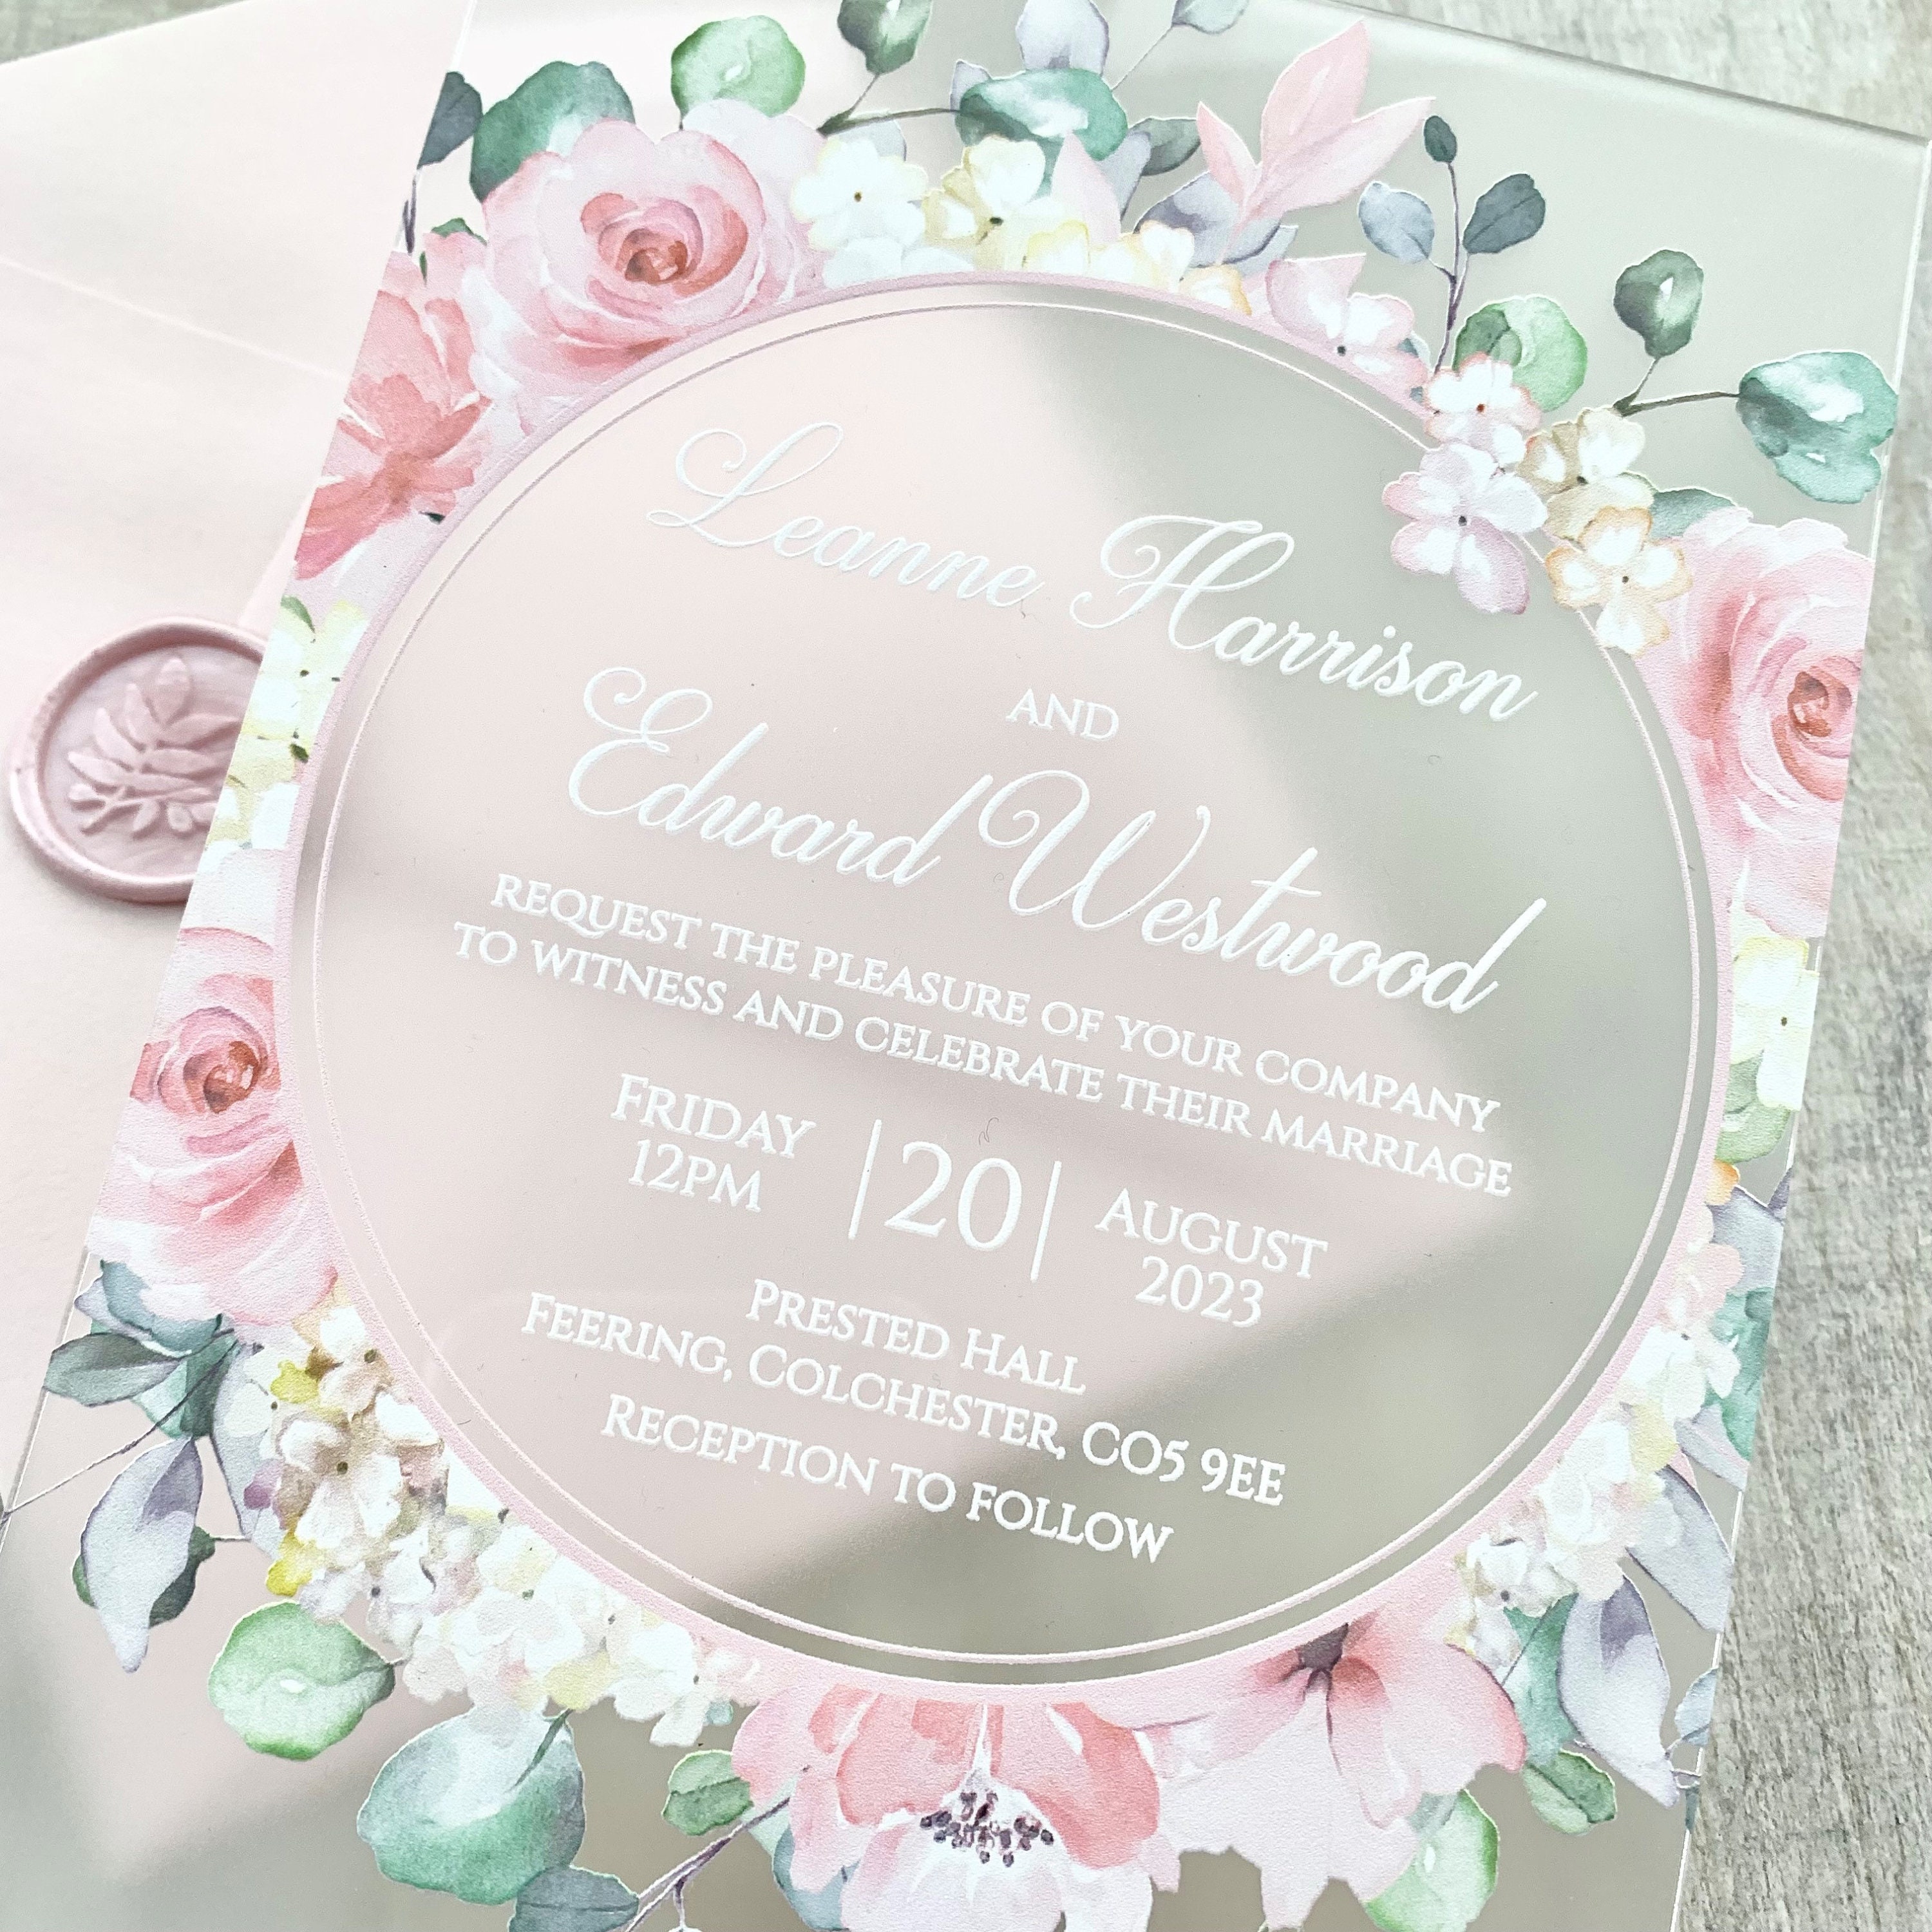 White and Dusty Rose Color Door Style Acrylic Invitations – My